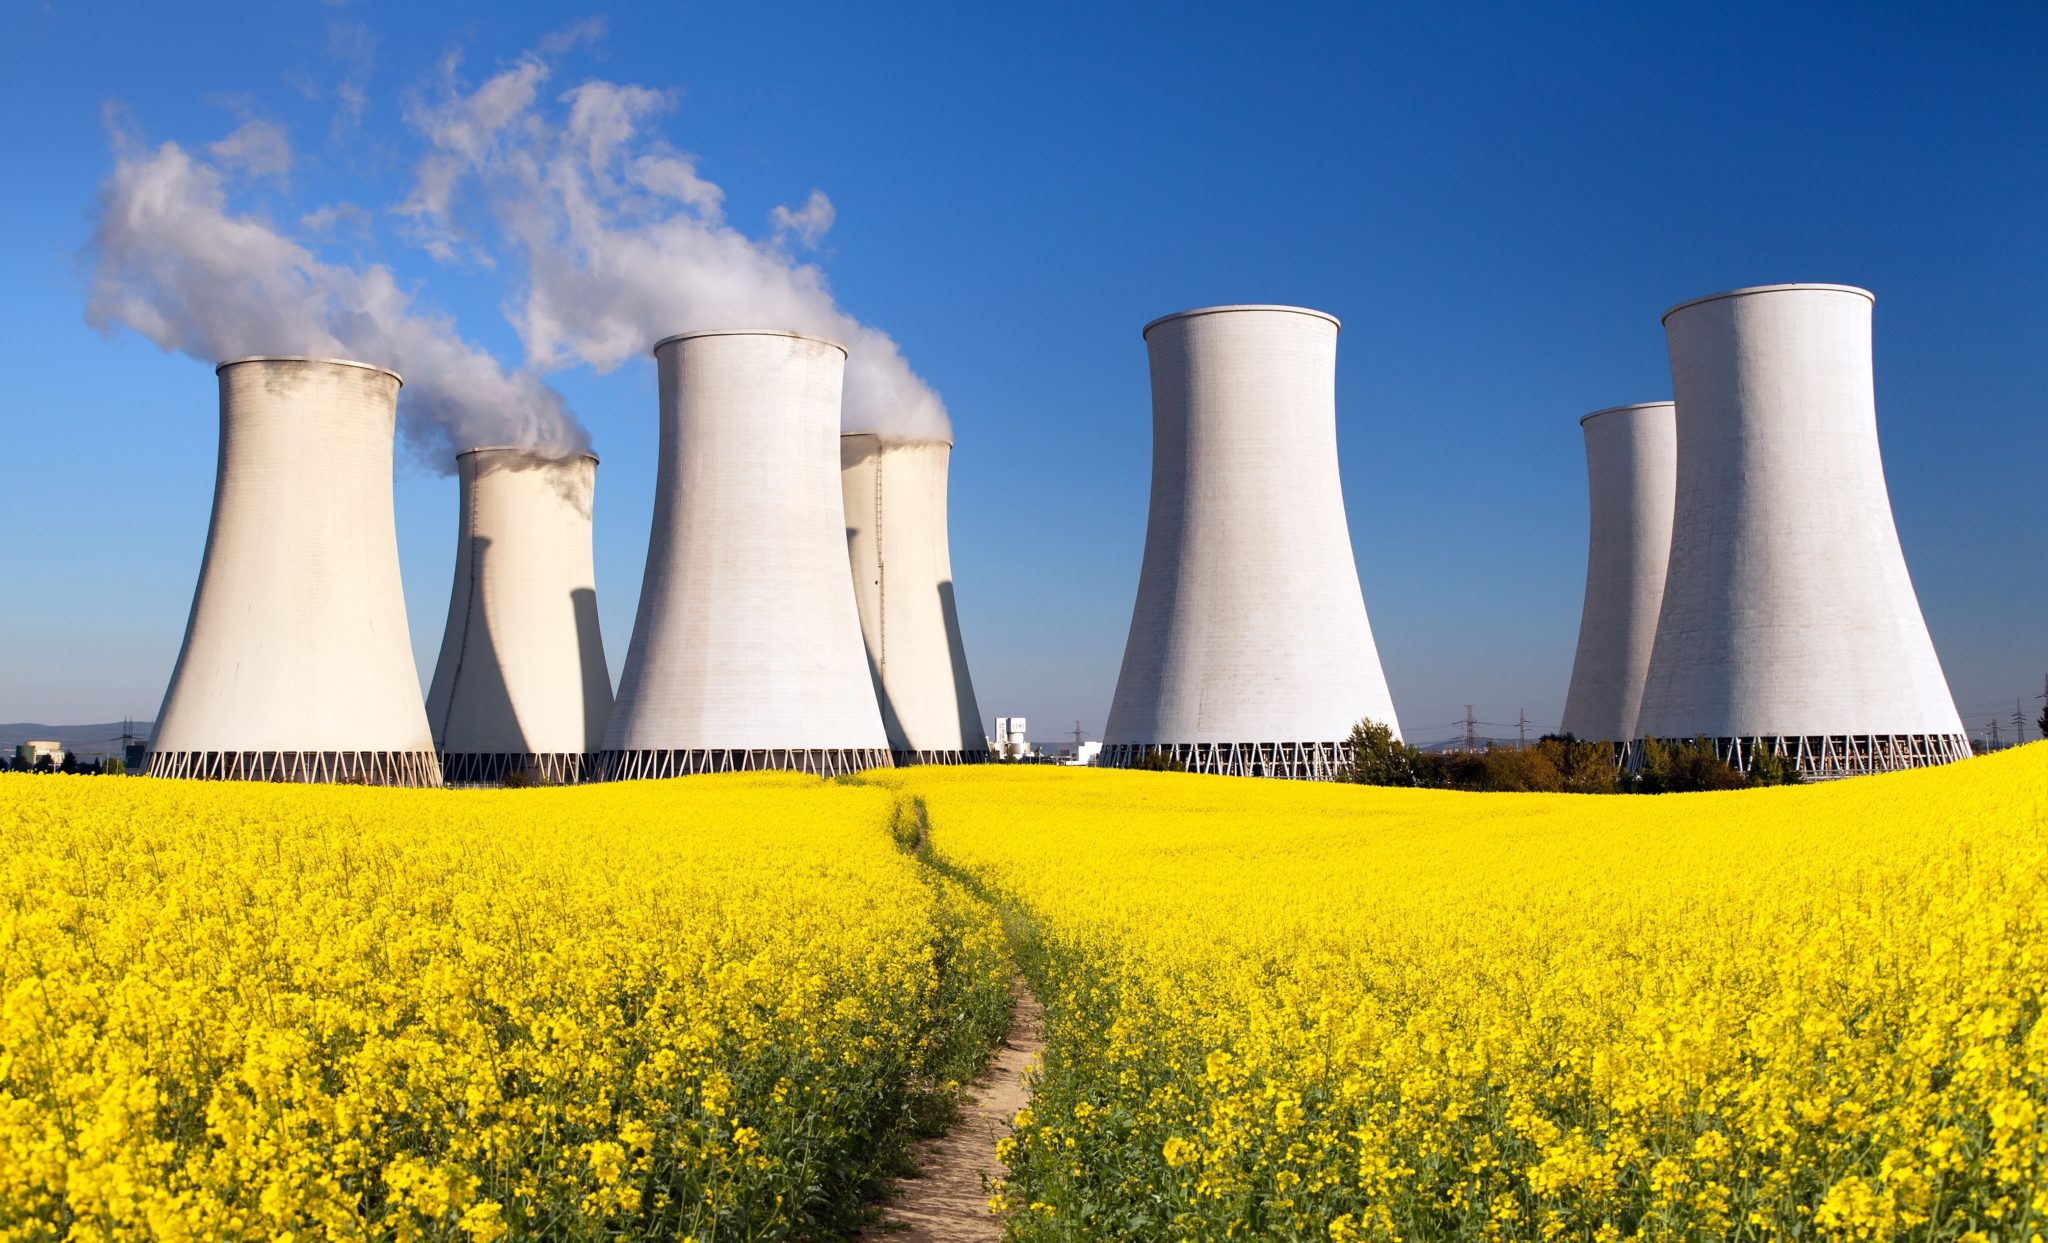 Panoramic,View,Of,Nuclear,Power,Plant,Jaslovske,Bohunice,With,Golden